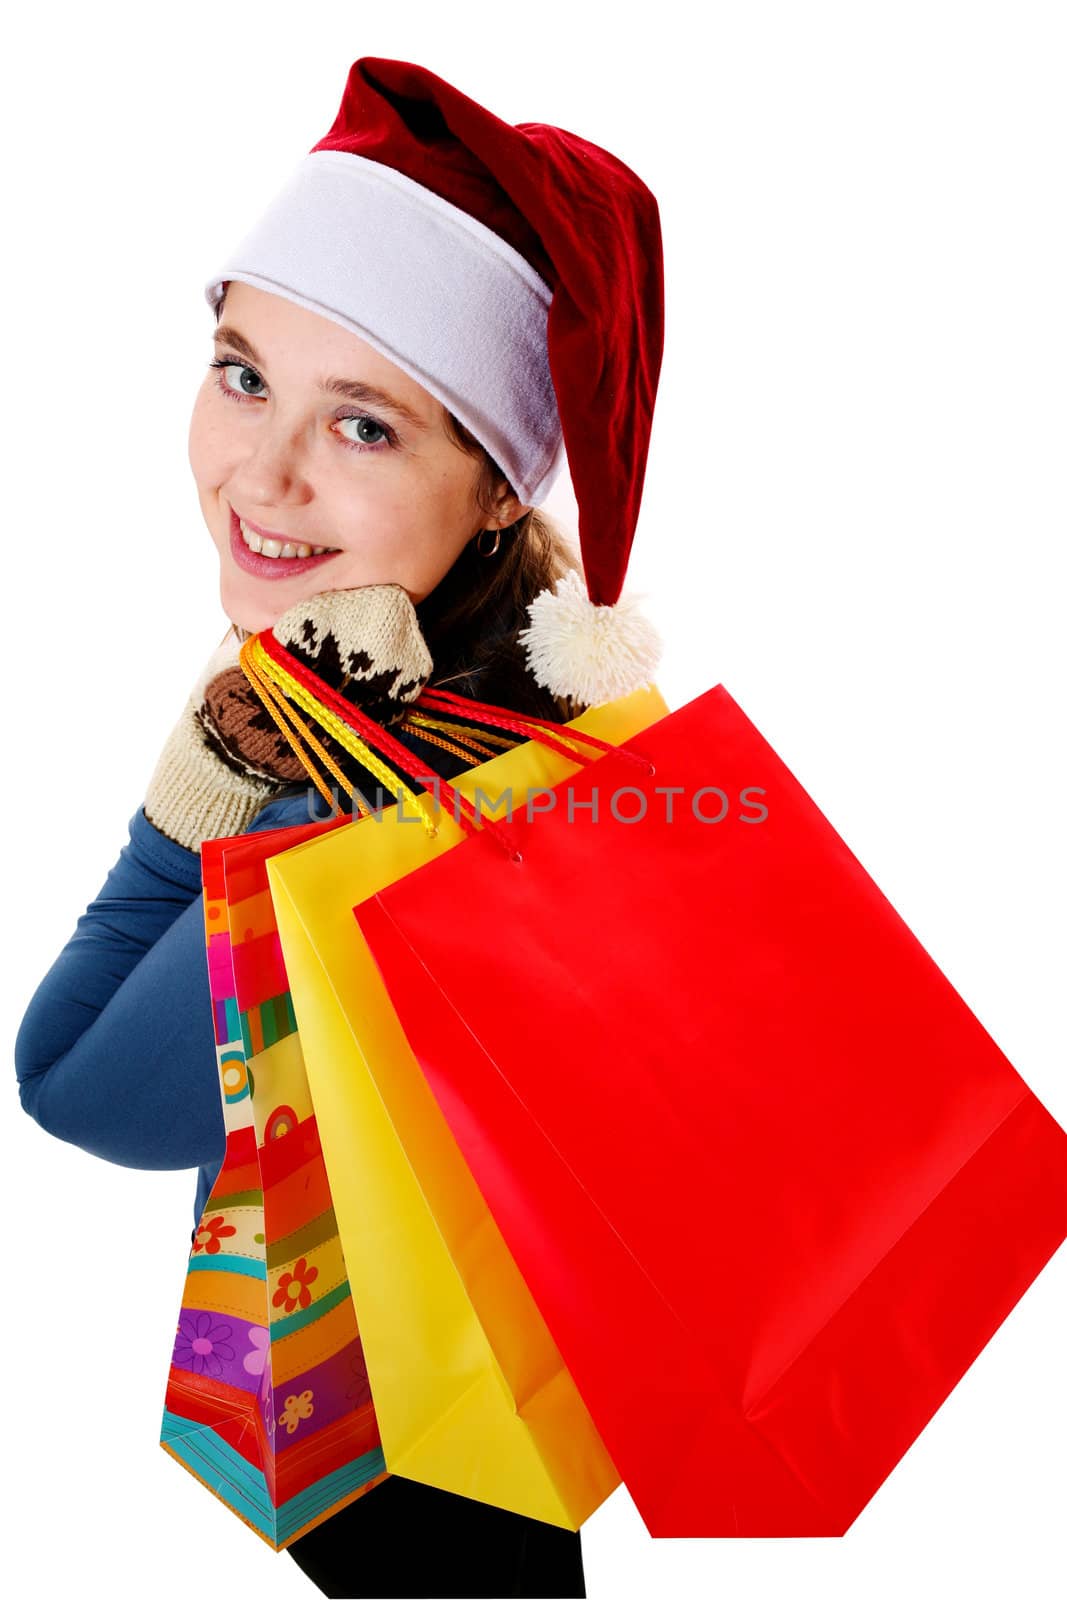 An image of a nice girl in a red cap with bags